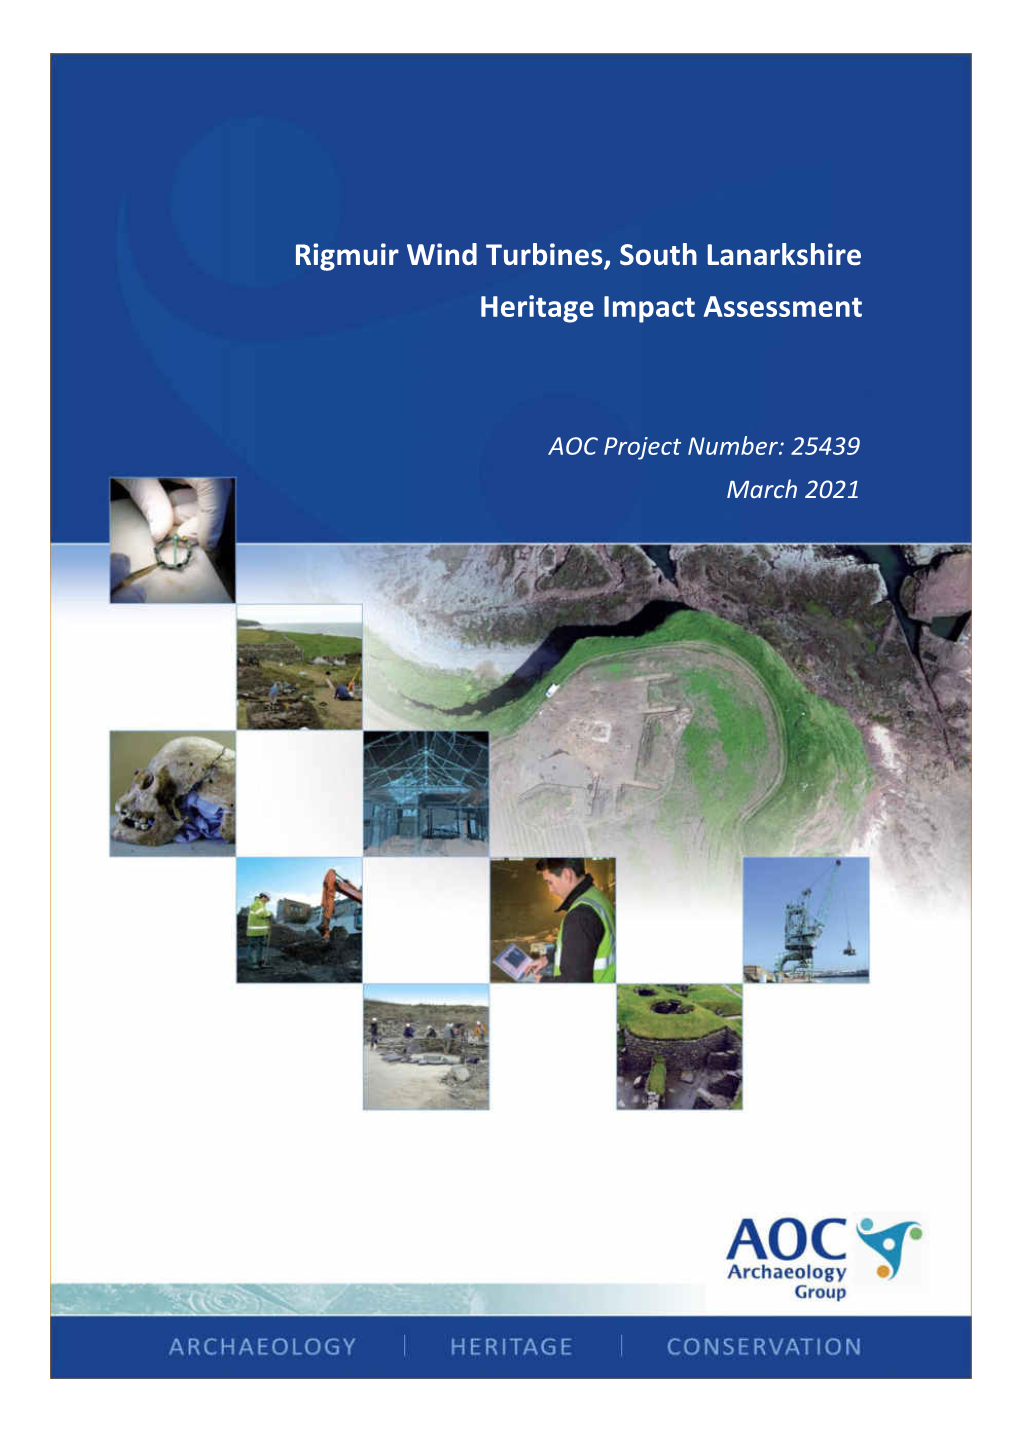 Rigmuir Wind Turbines, South Lanarkshire: Heritage Impact Assessment